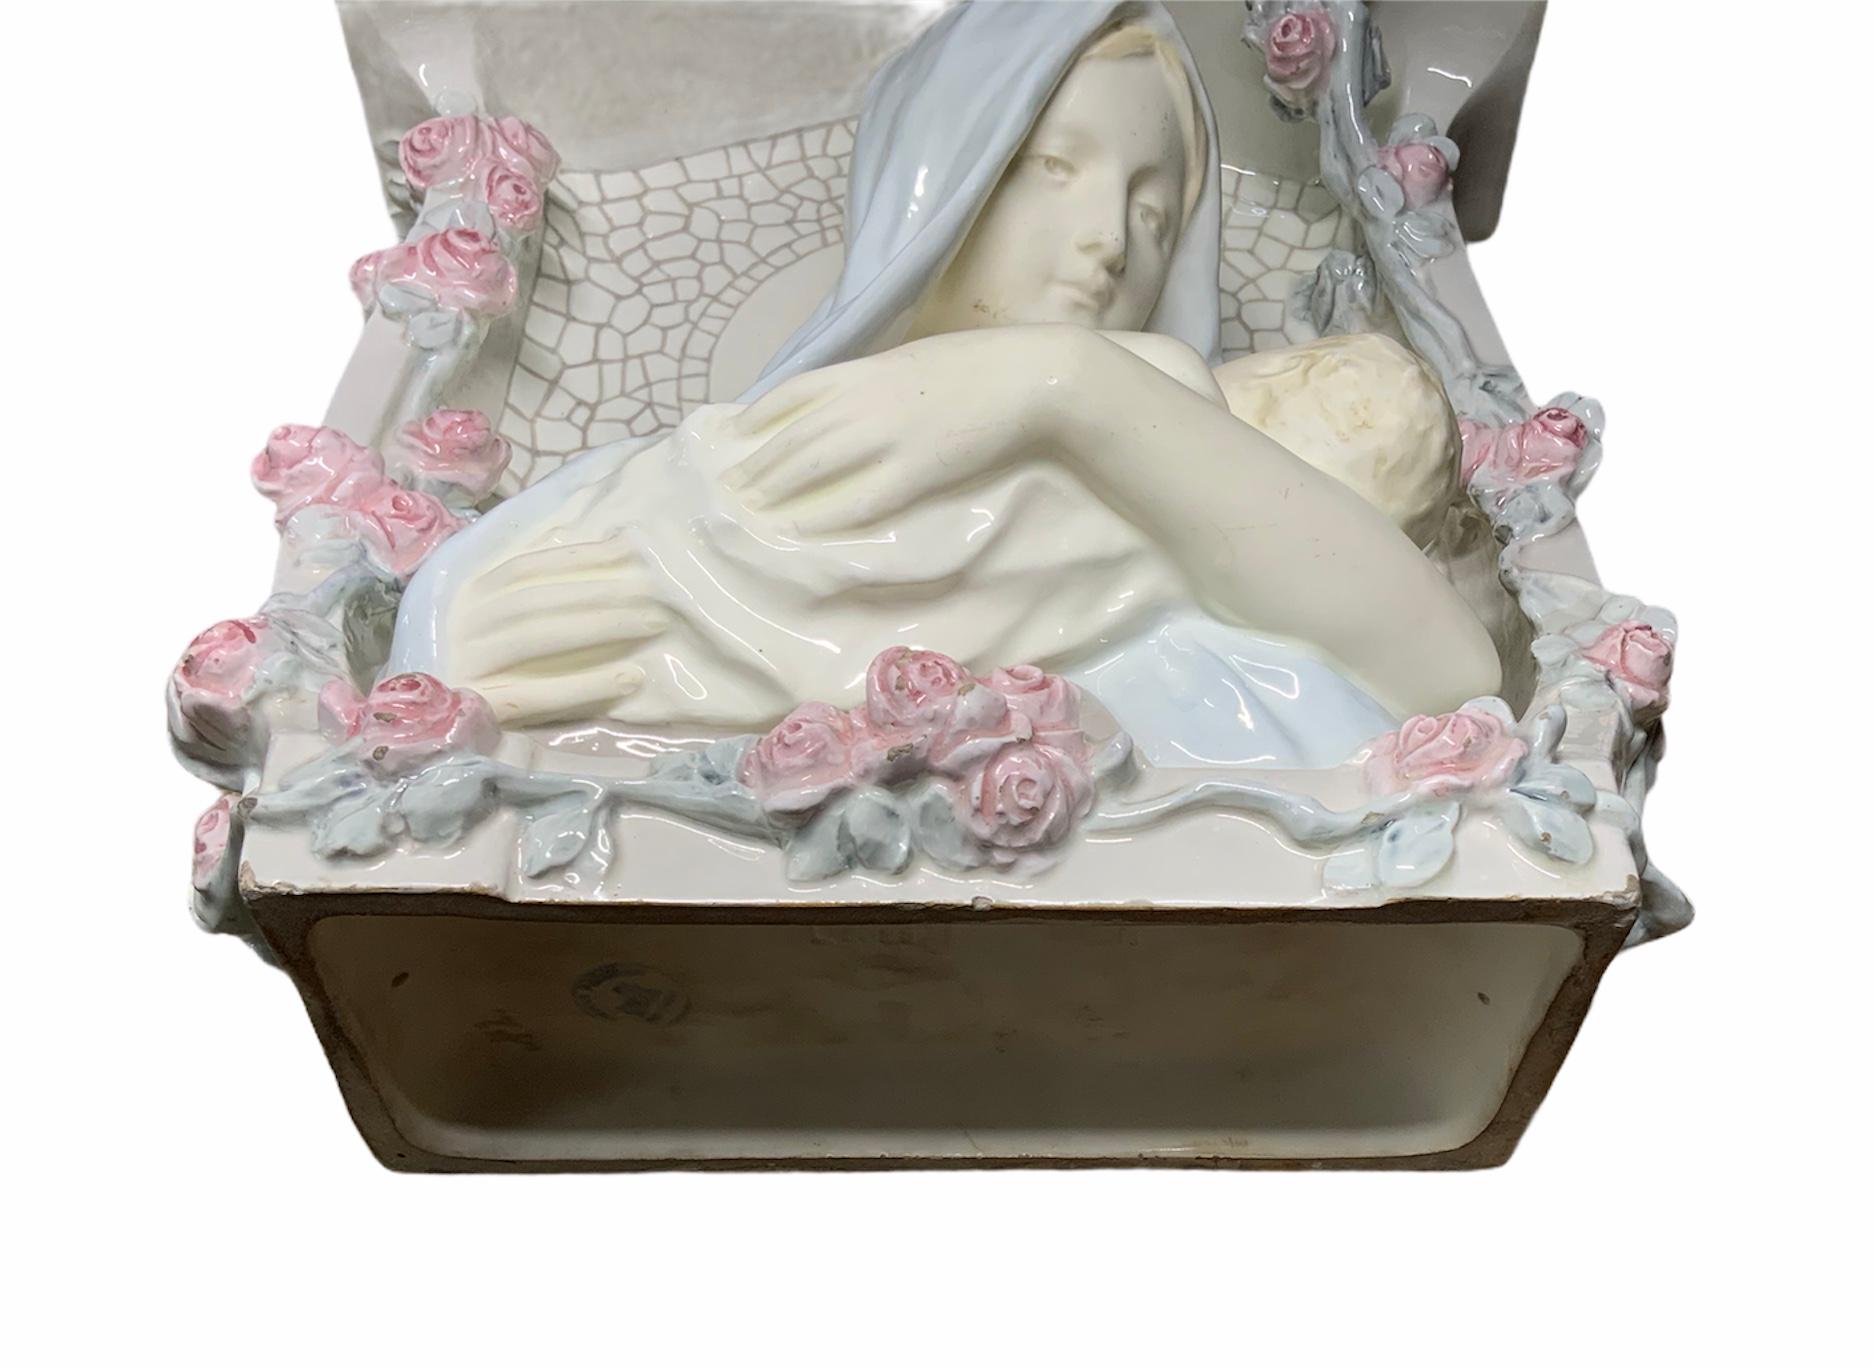 Hand-Painted Rare Wall Religious Porcelain Niche of Virgin Mary Bust and Baby Jesus